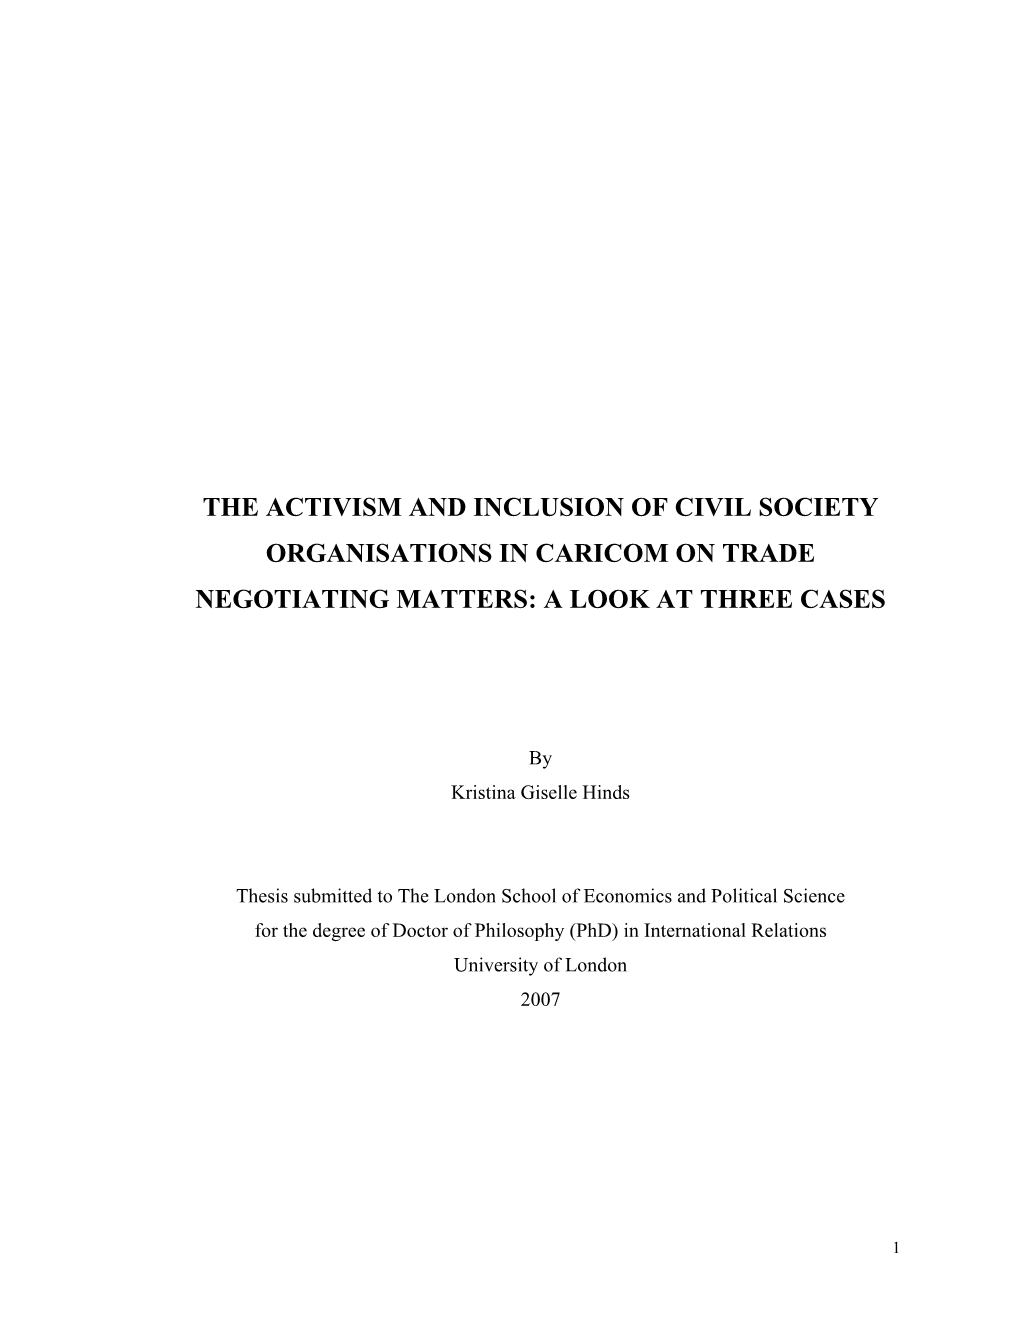 The Activism and Inclusion of Civil Society Organisations in Caricom on Trade Negotiating Matters: a Look at Three Cases